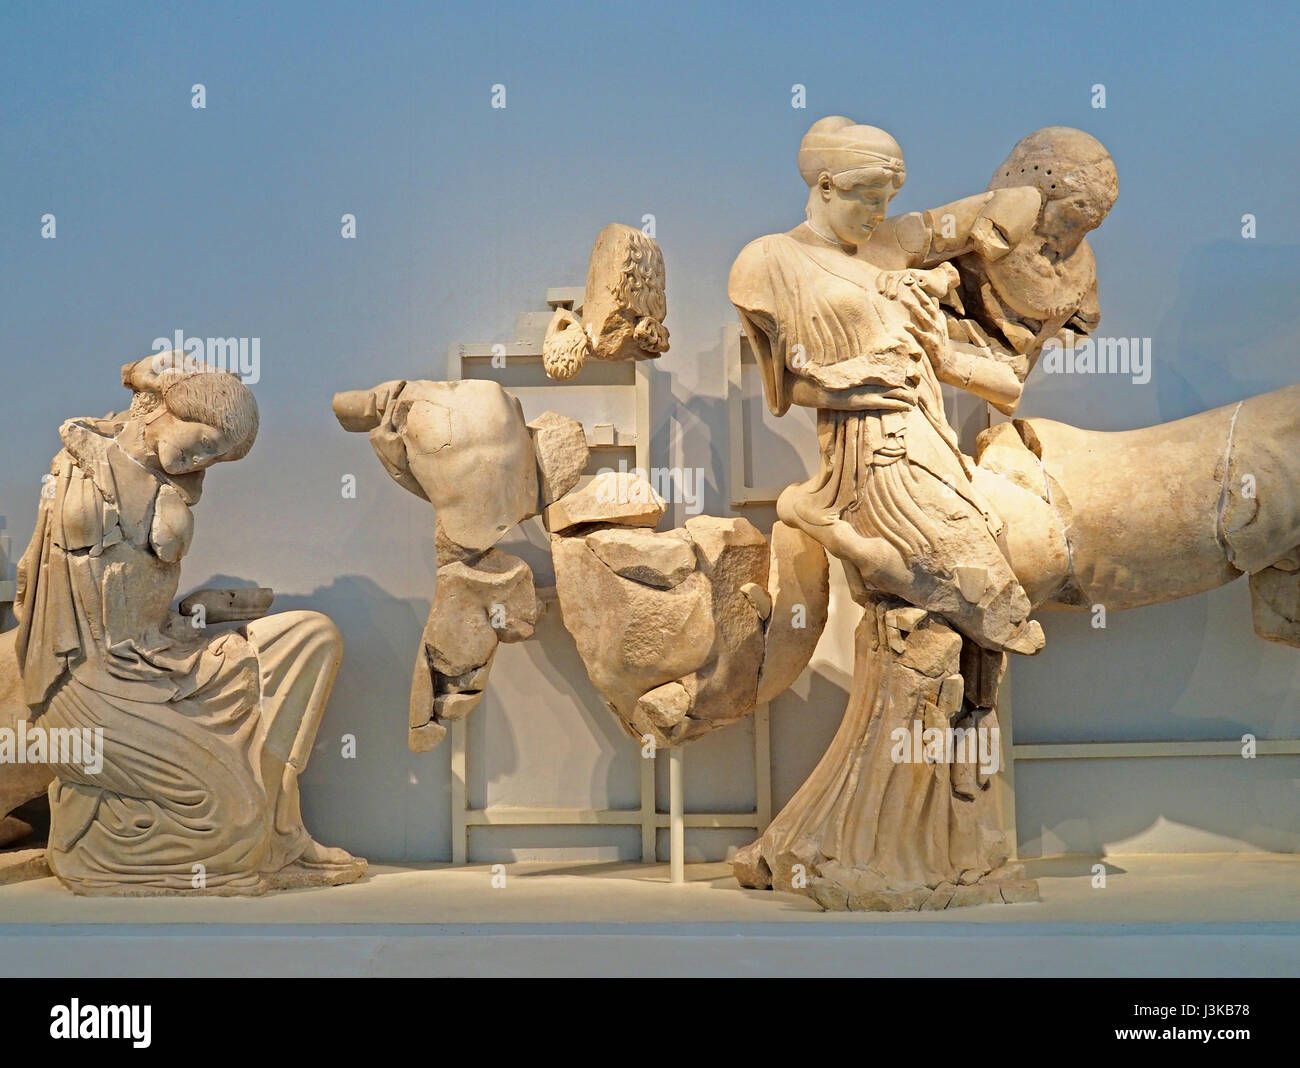 Battle of Lapiths and Centaurs sculptures from Temple of Zeus in the Olympia Museum. Stock Photo